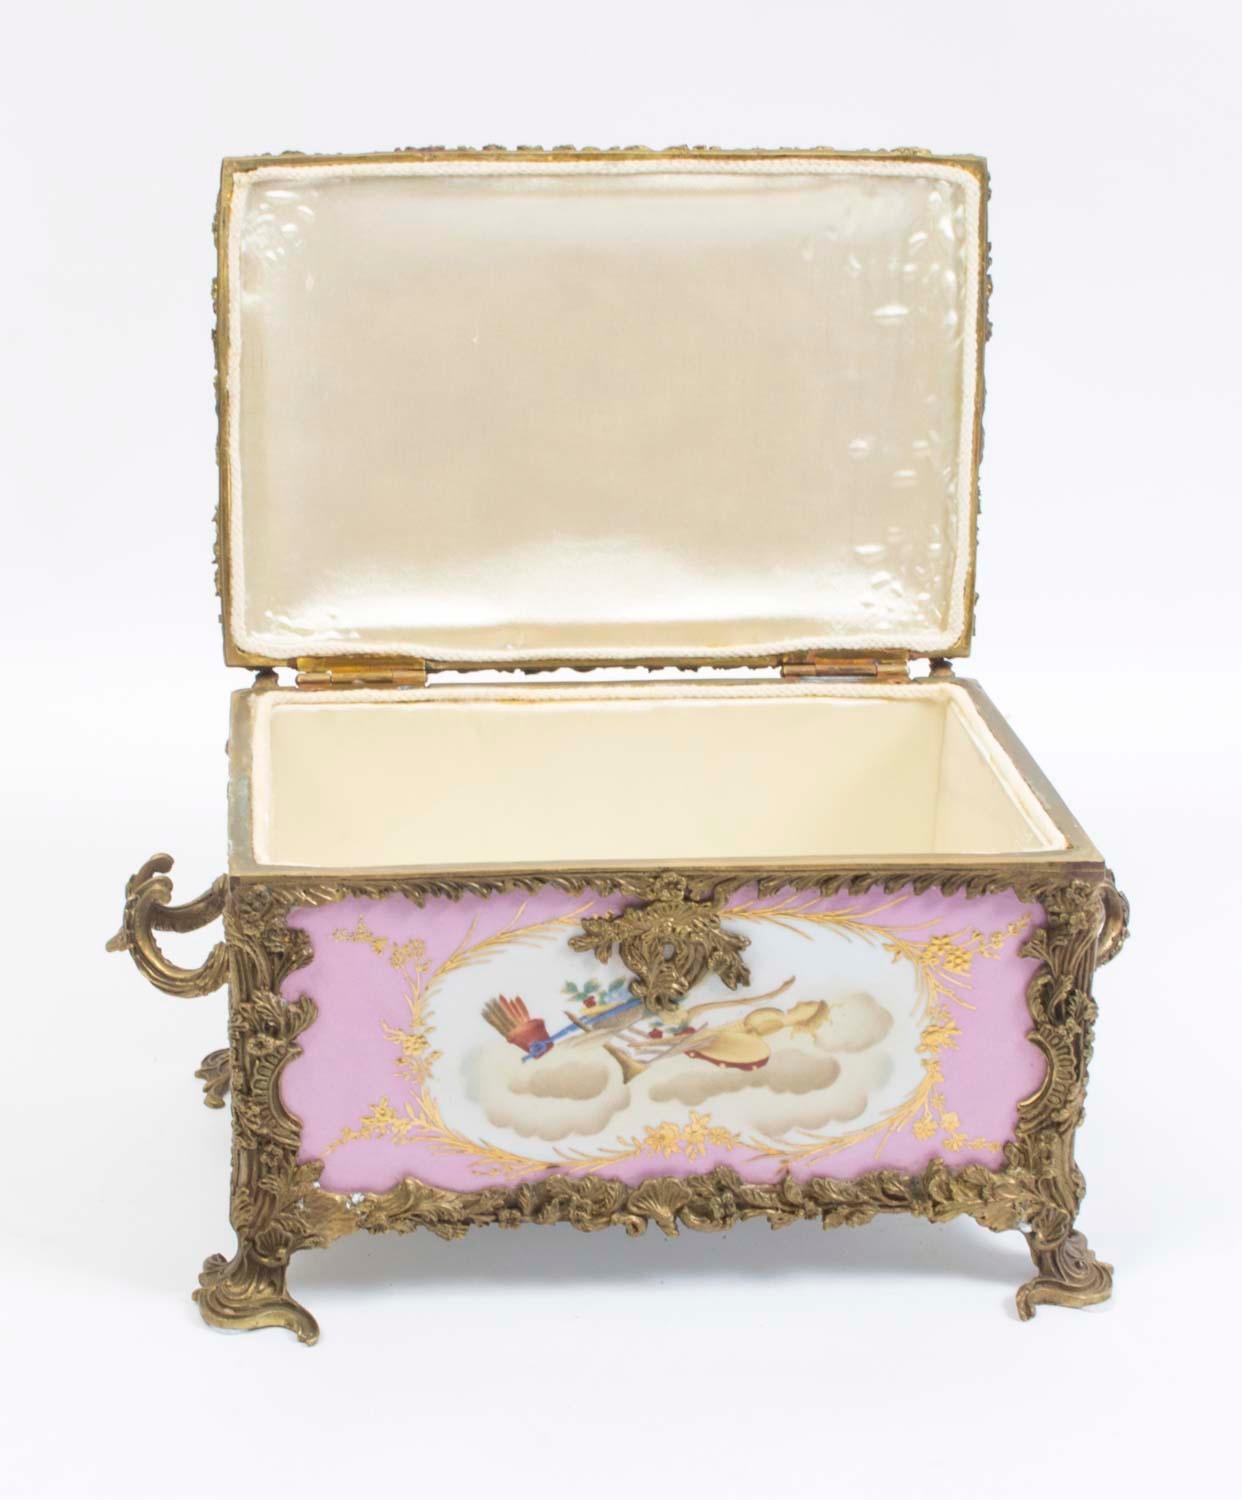 French Lovely Hand Painted Sevres Style Porcelain Casket Pink